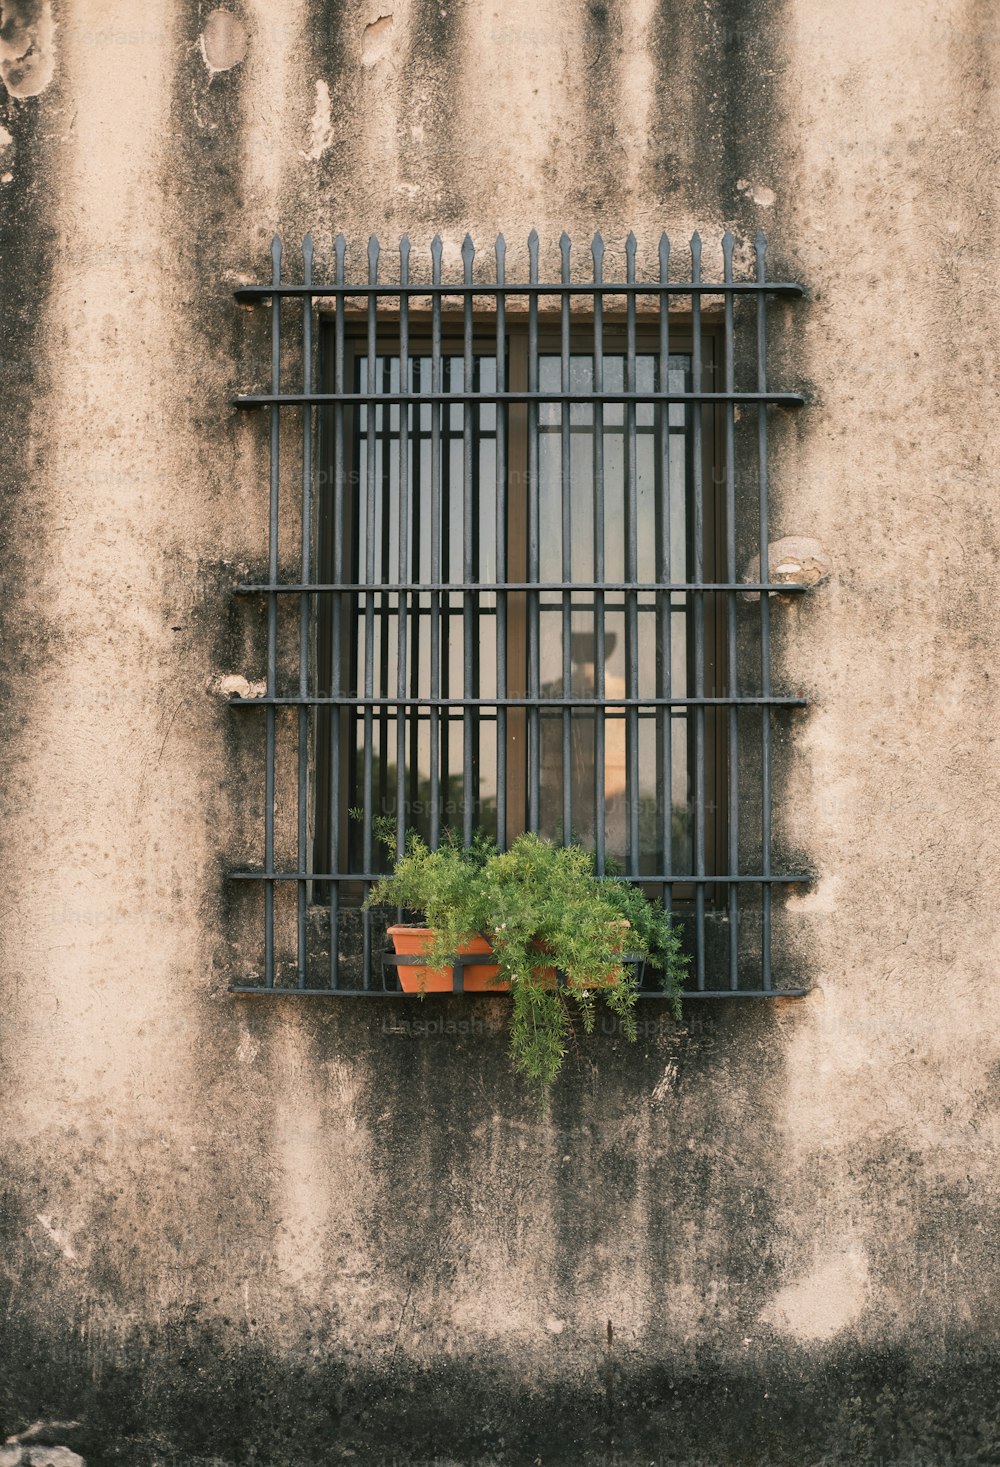 a window with bars and a potted plant in it